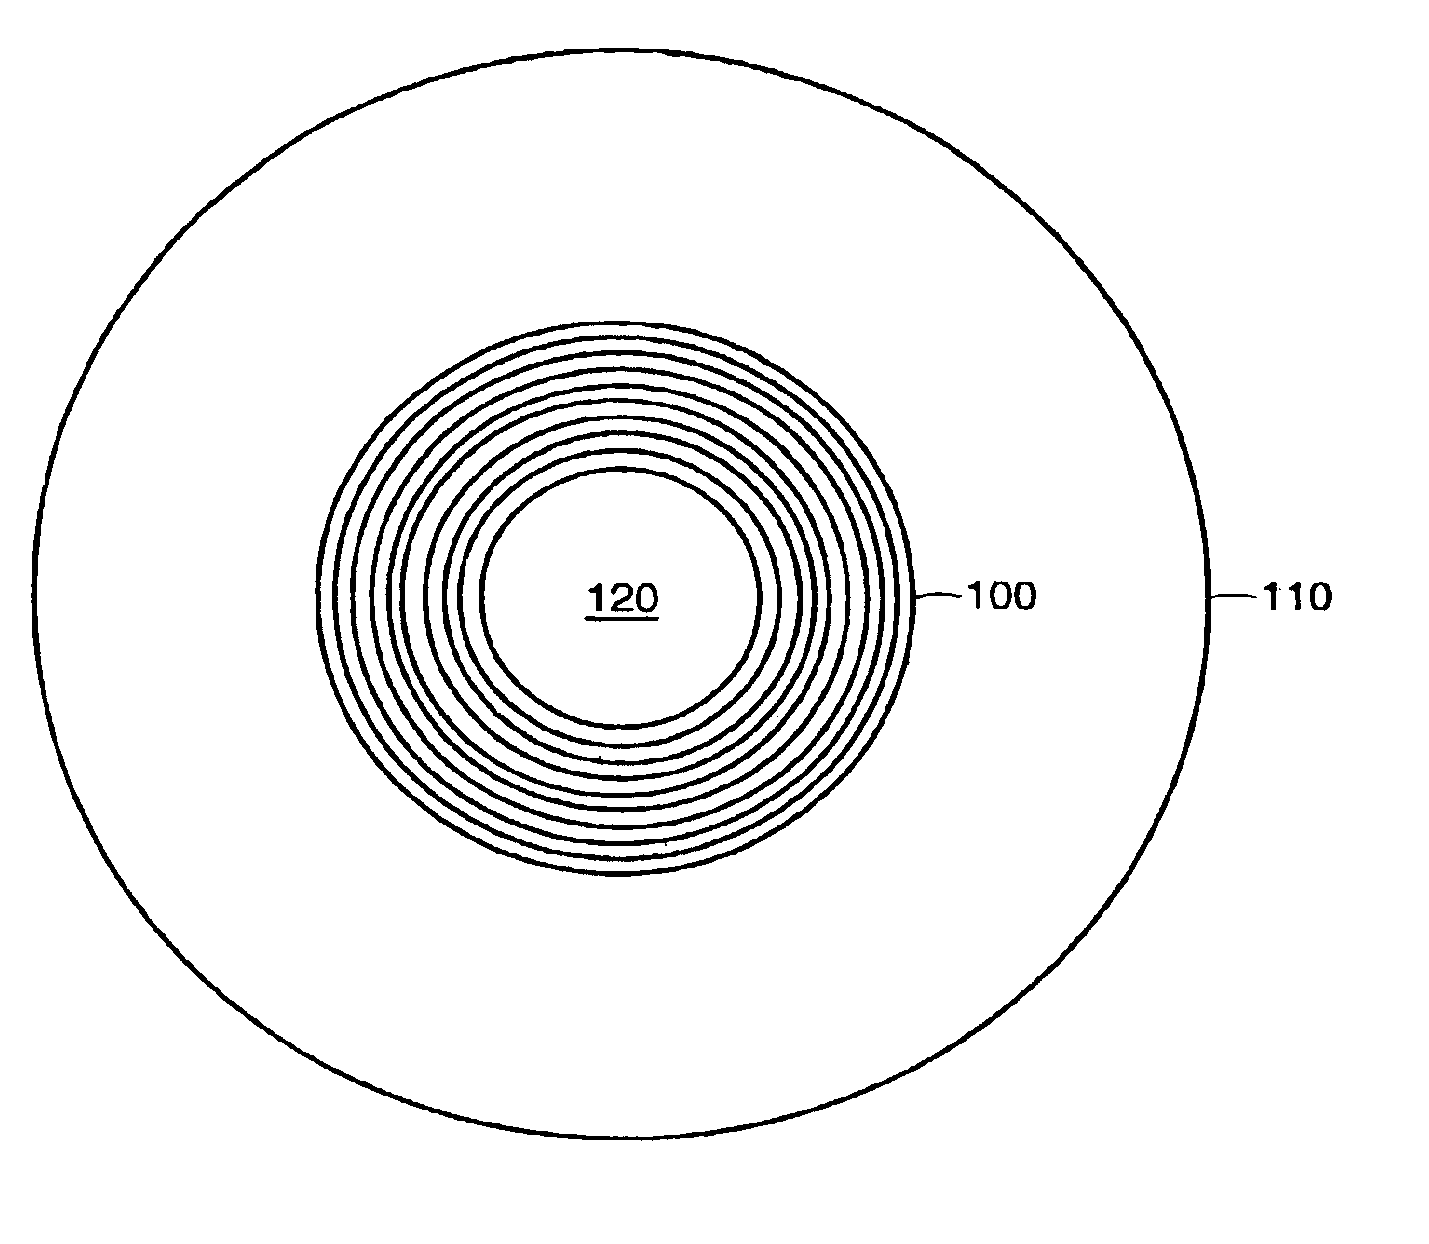 System and method for increasing the depth of focus of the human eye